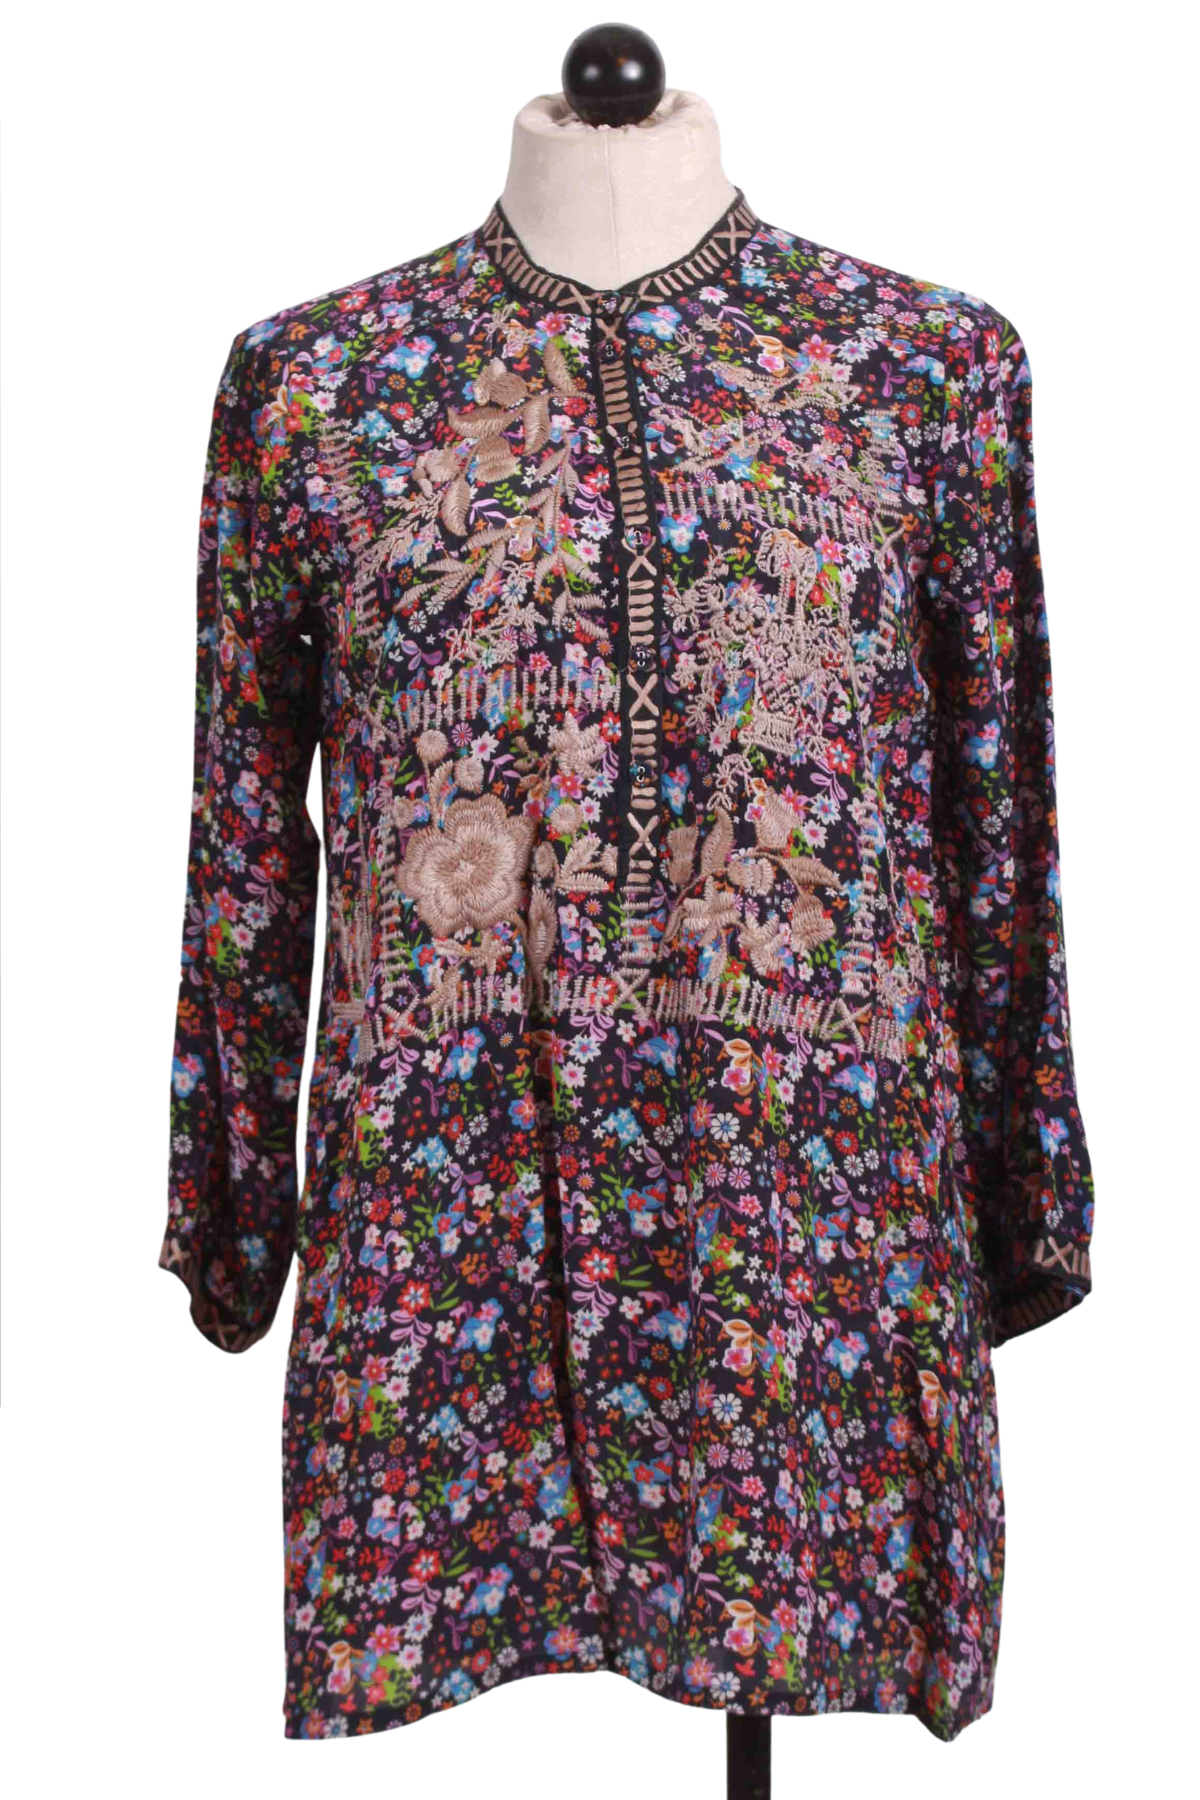 Floral Nite Cordia Tunic by Johnny Was